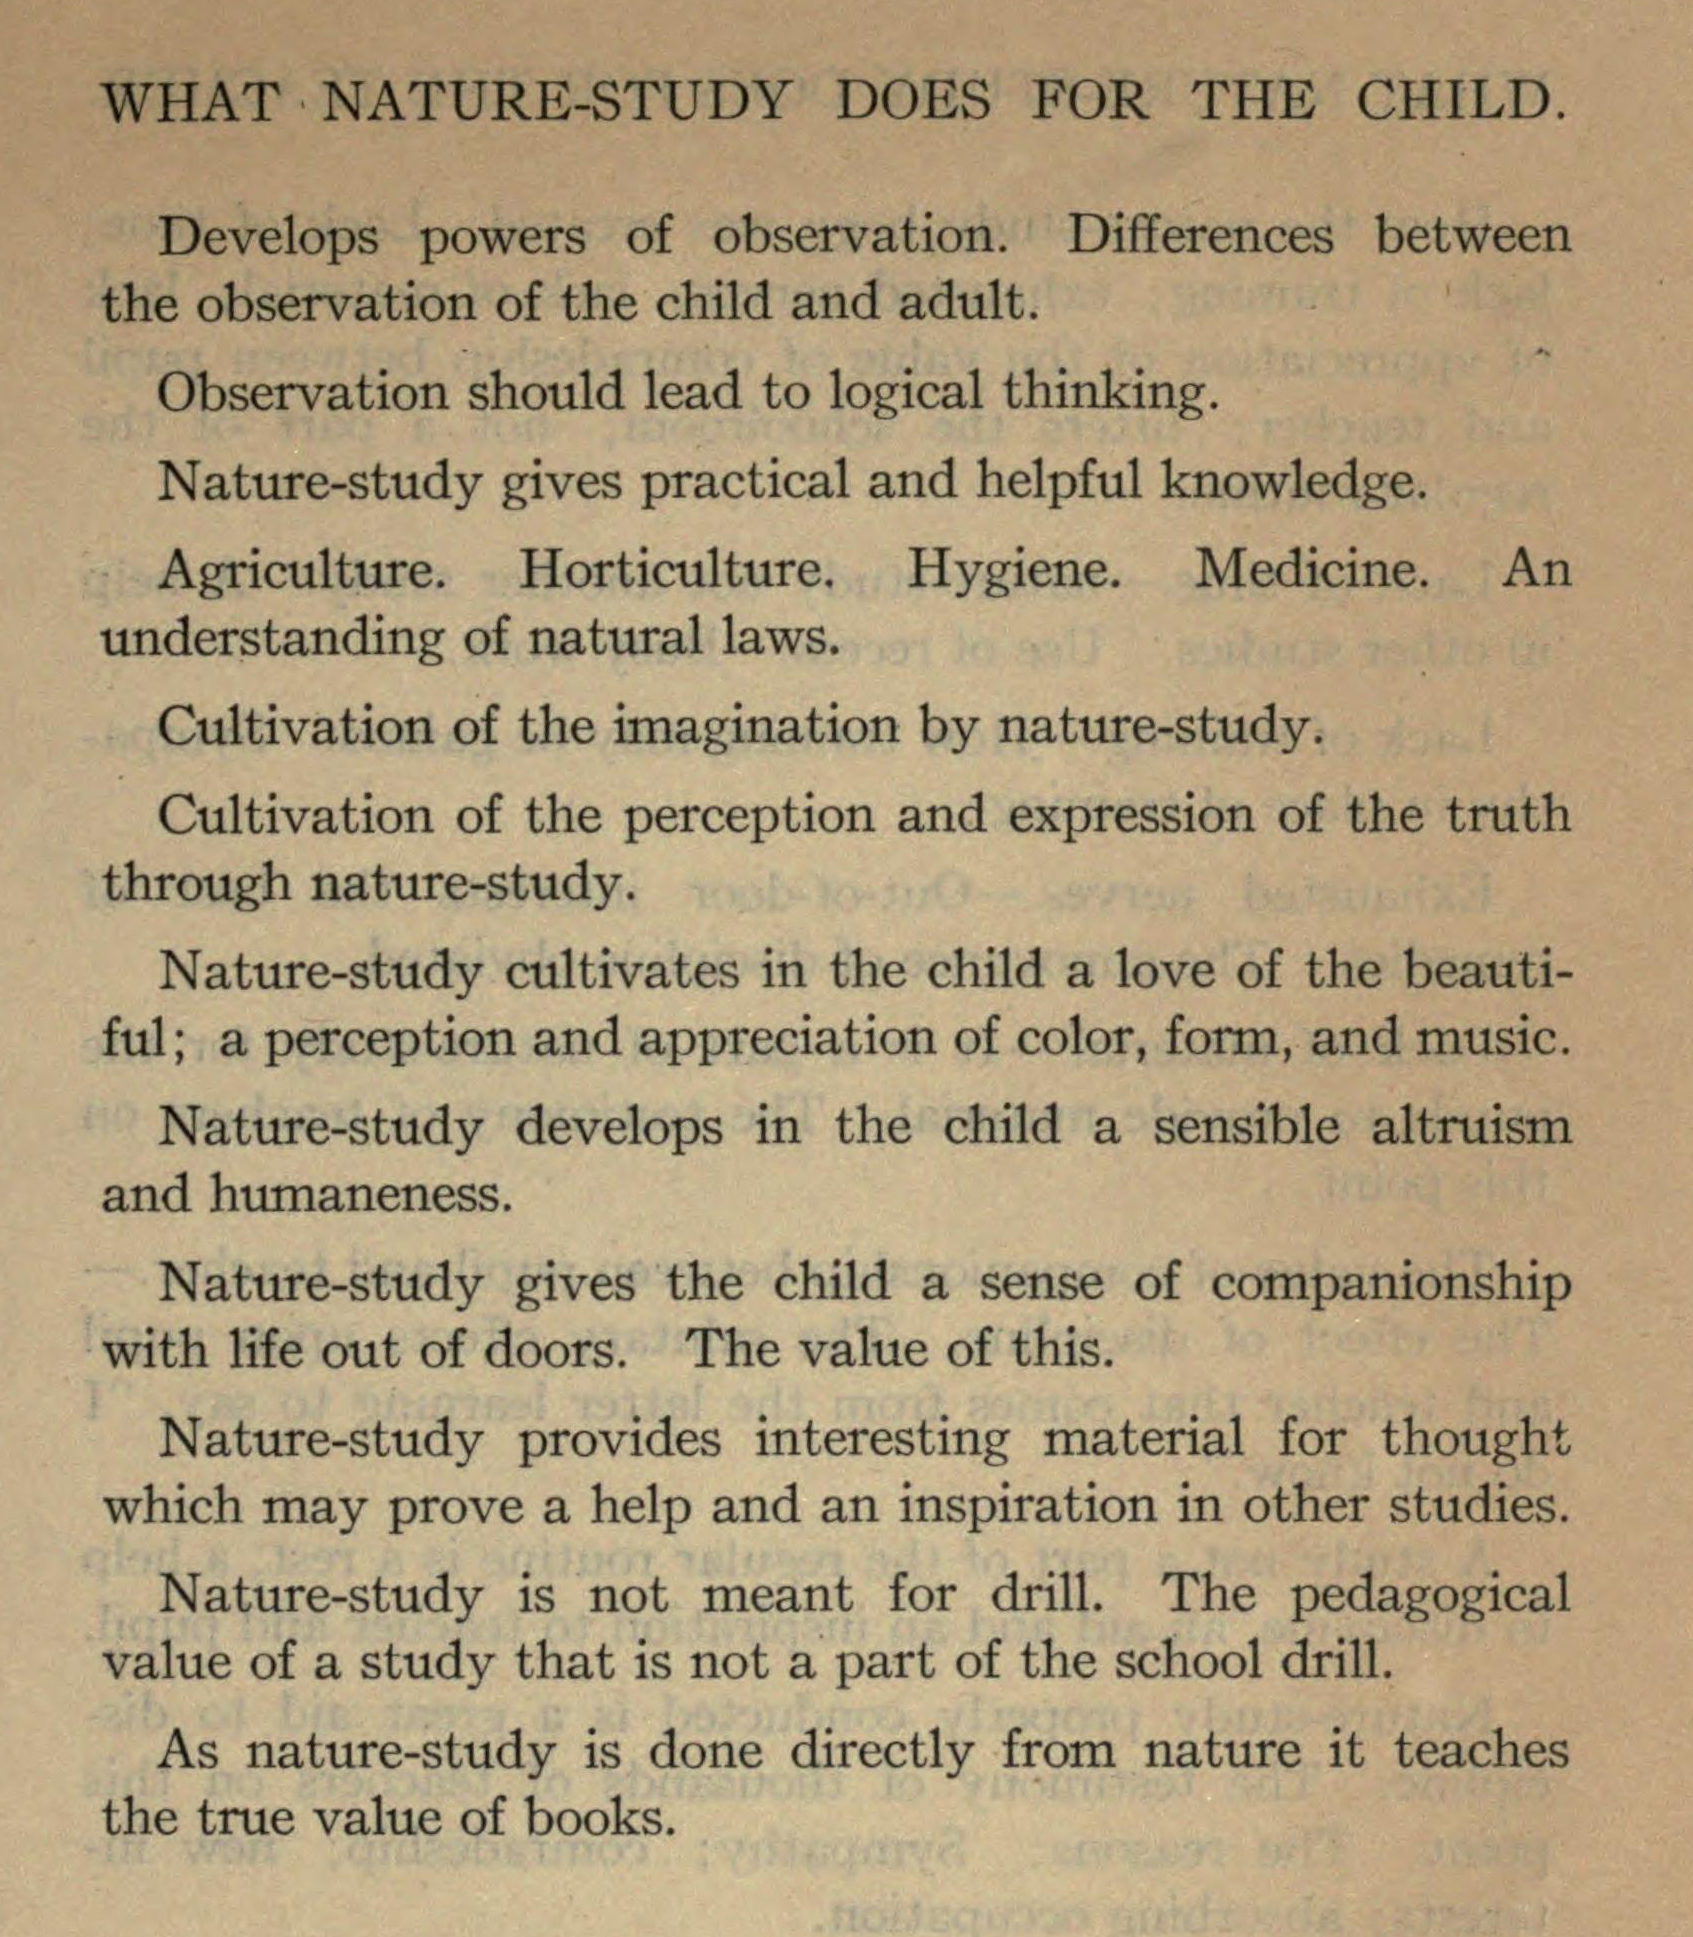 text for "what nature study does for the child"